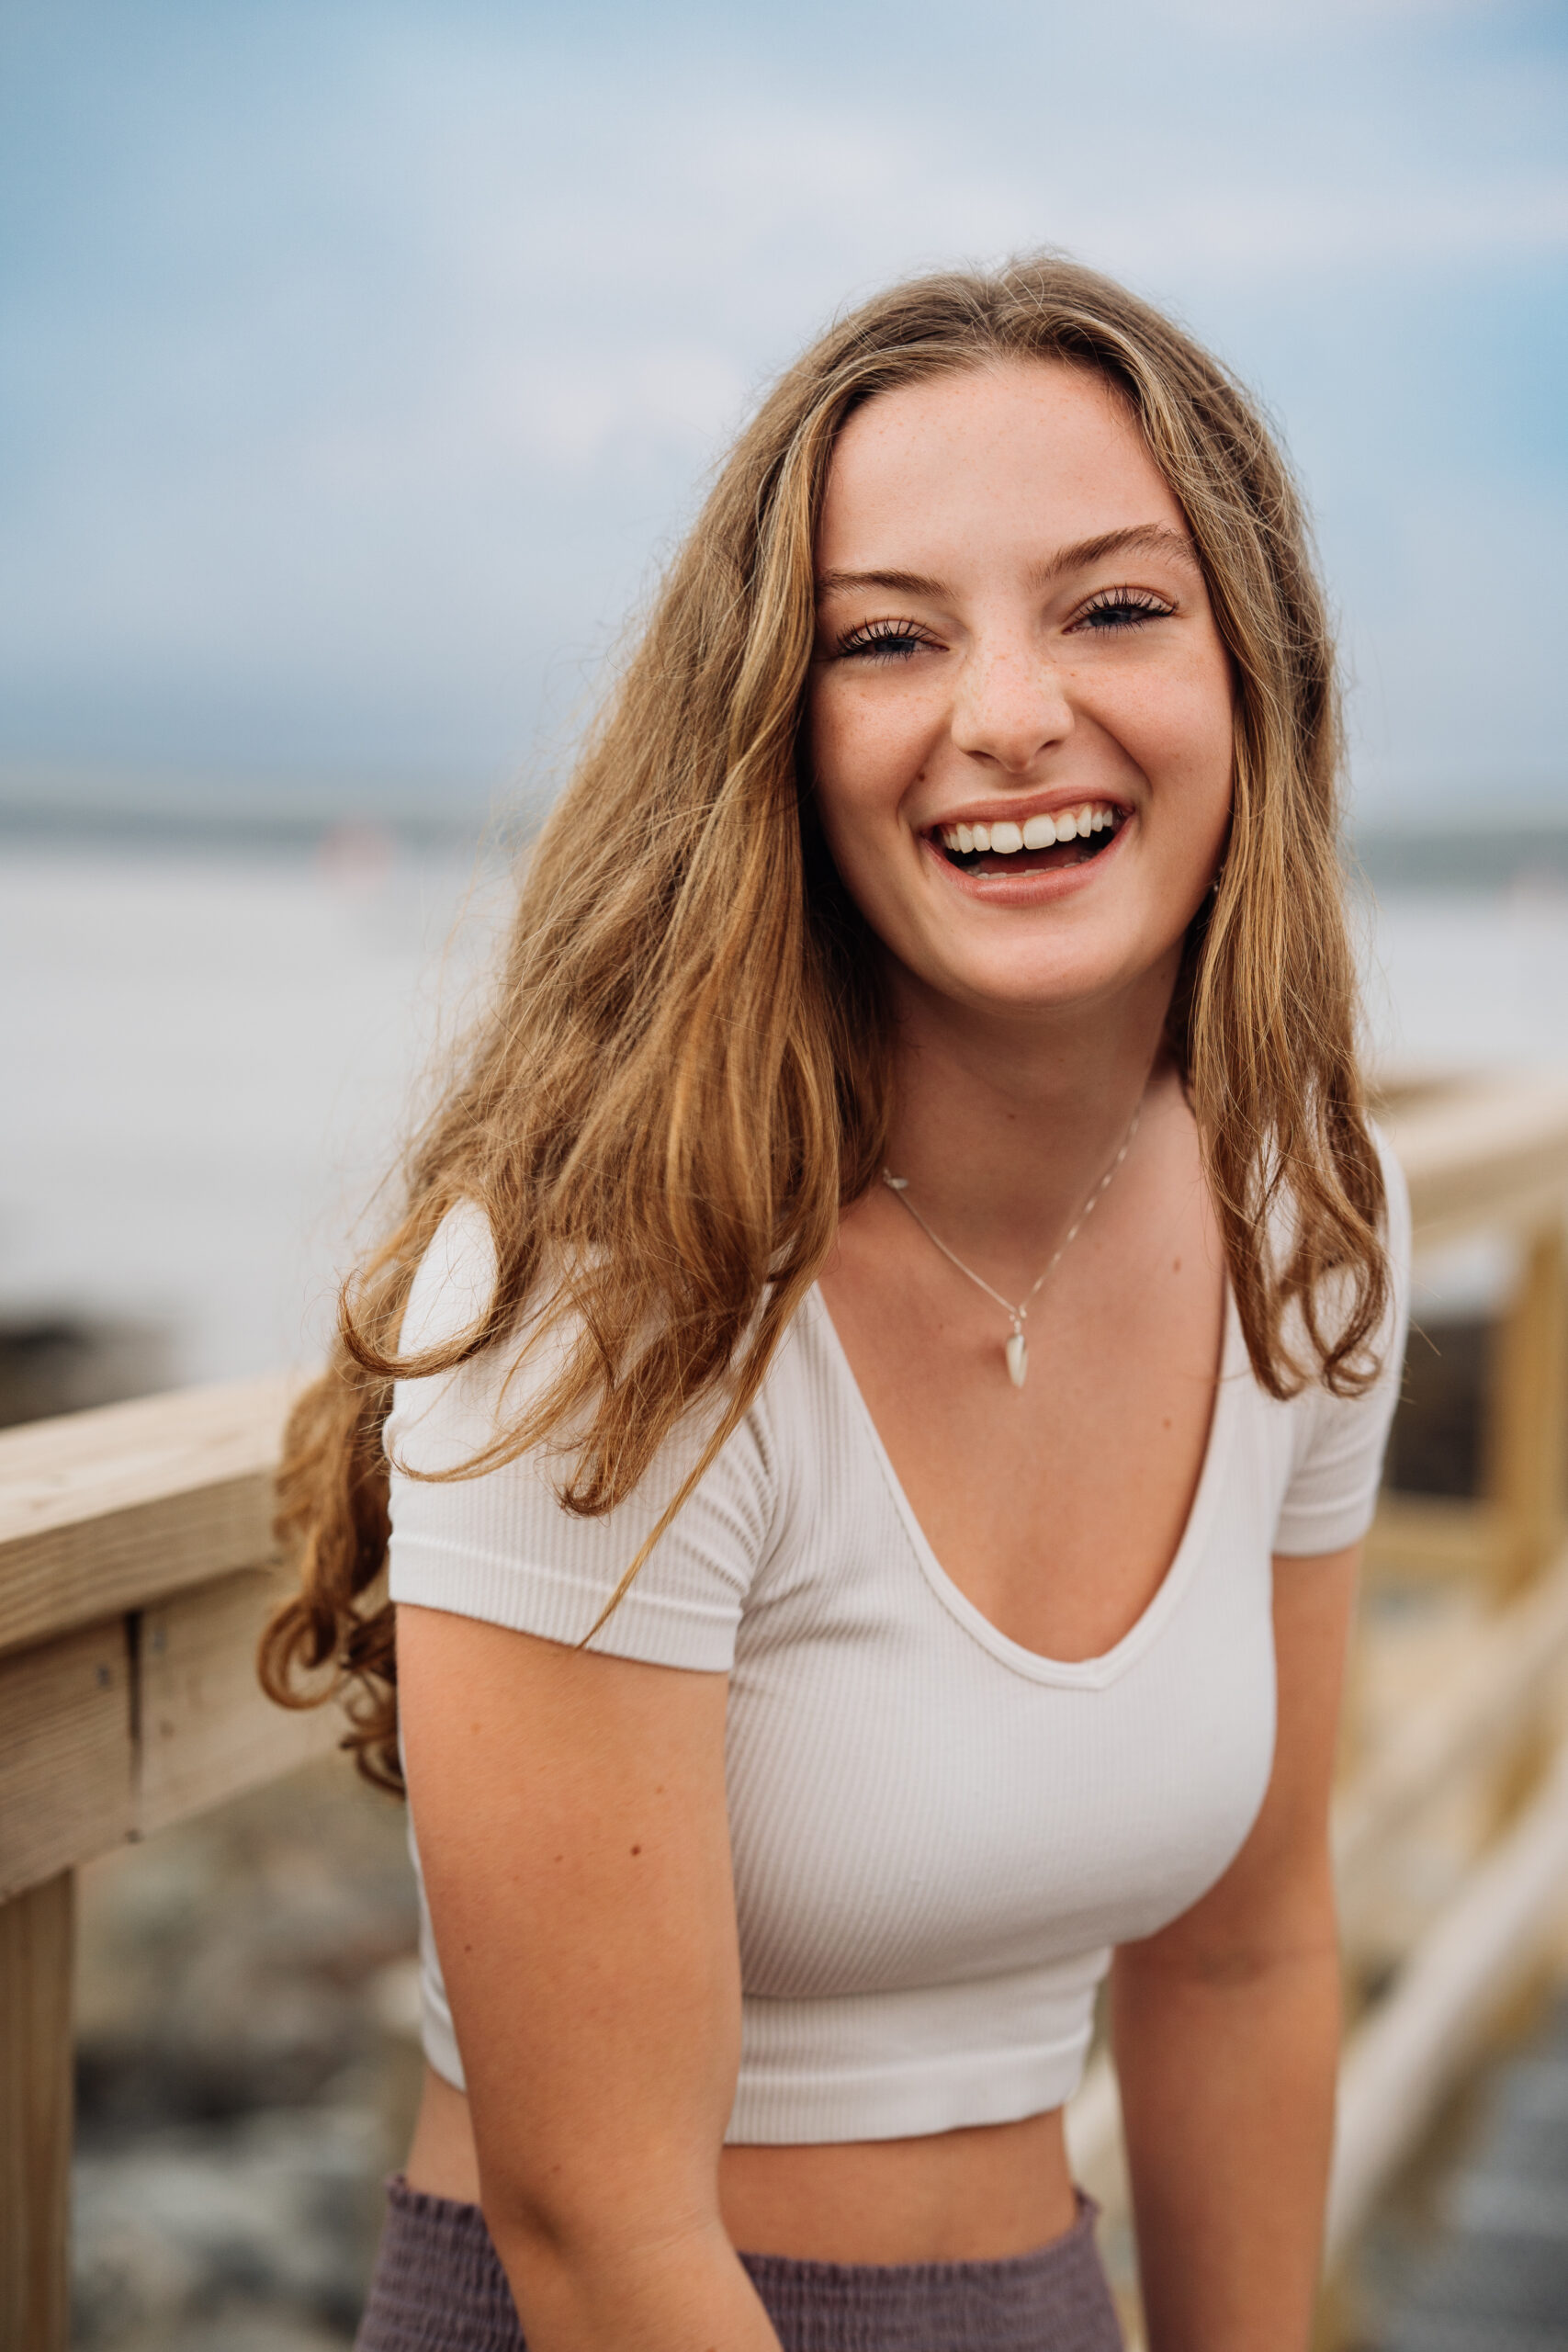 high school senior girl with brown hair laughing on a pier